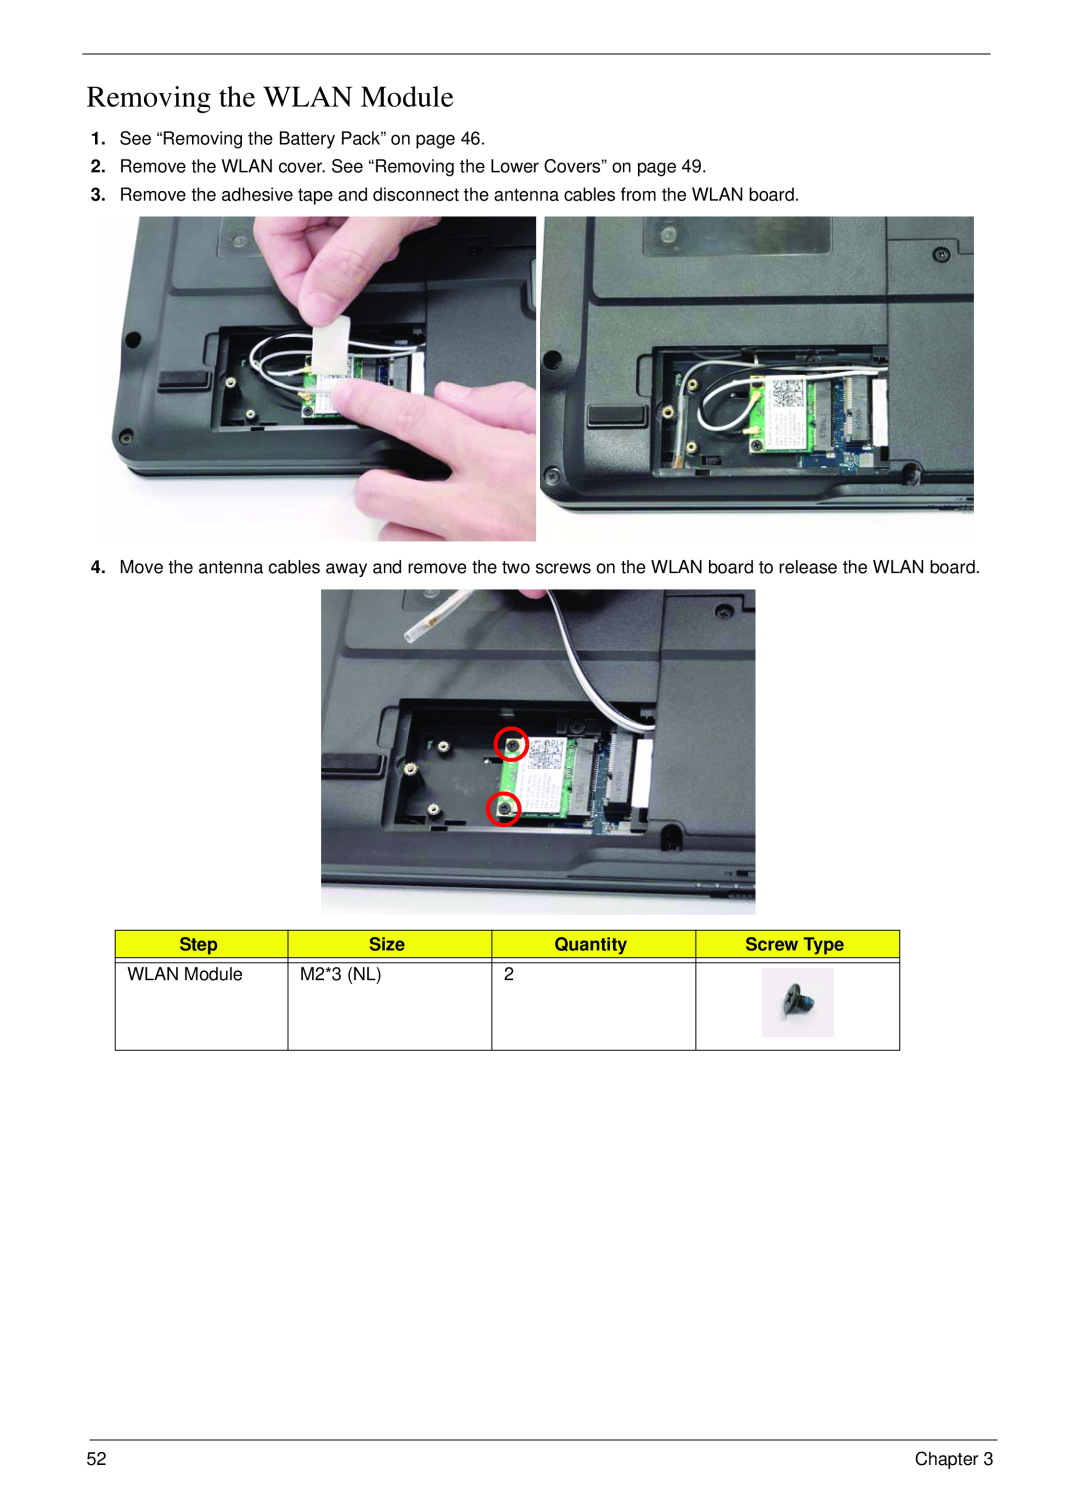 Acer 4730 manual Removing the WLAN Module, Step, Size, Quantity, Screw Type, M2*3 NL 